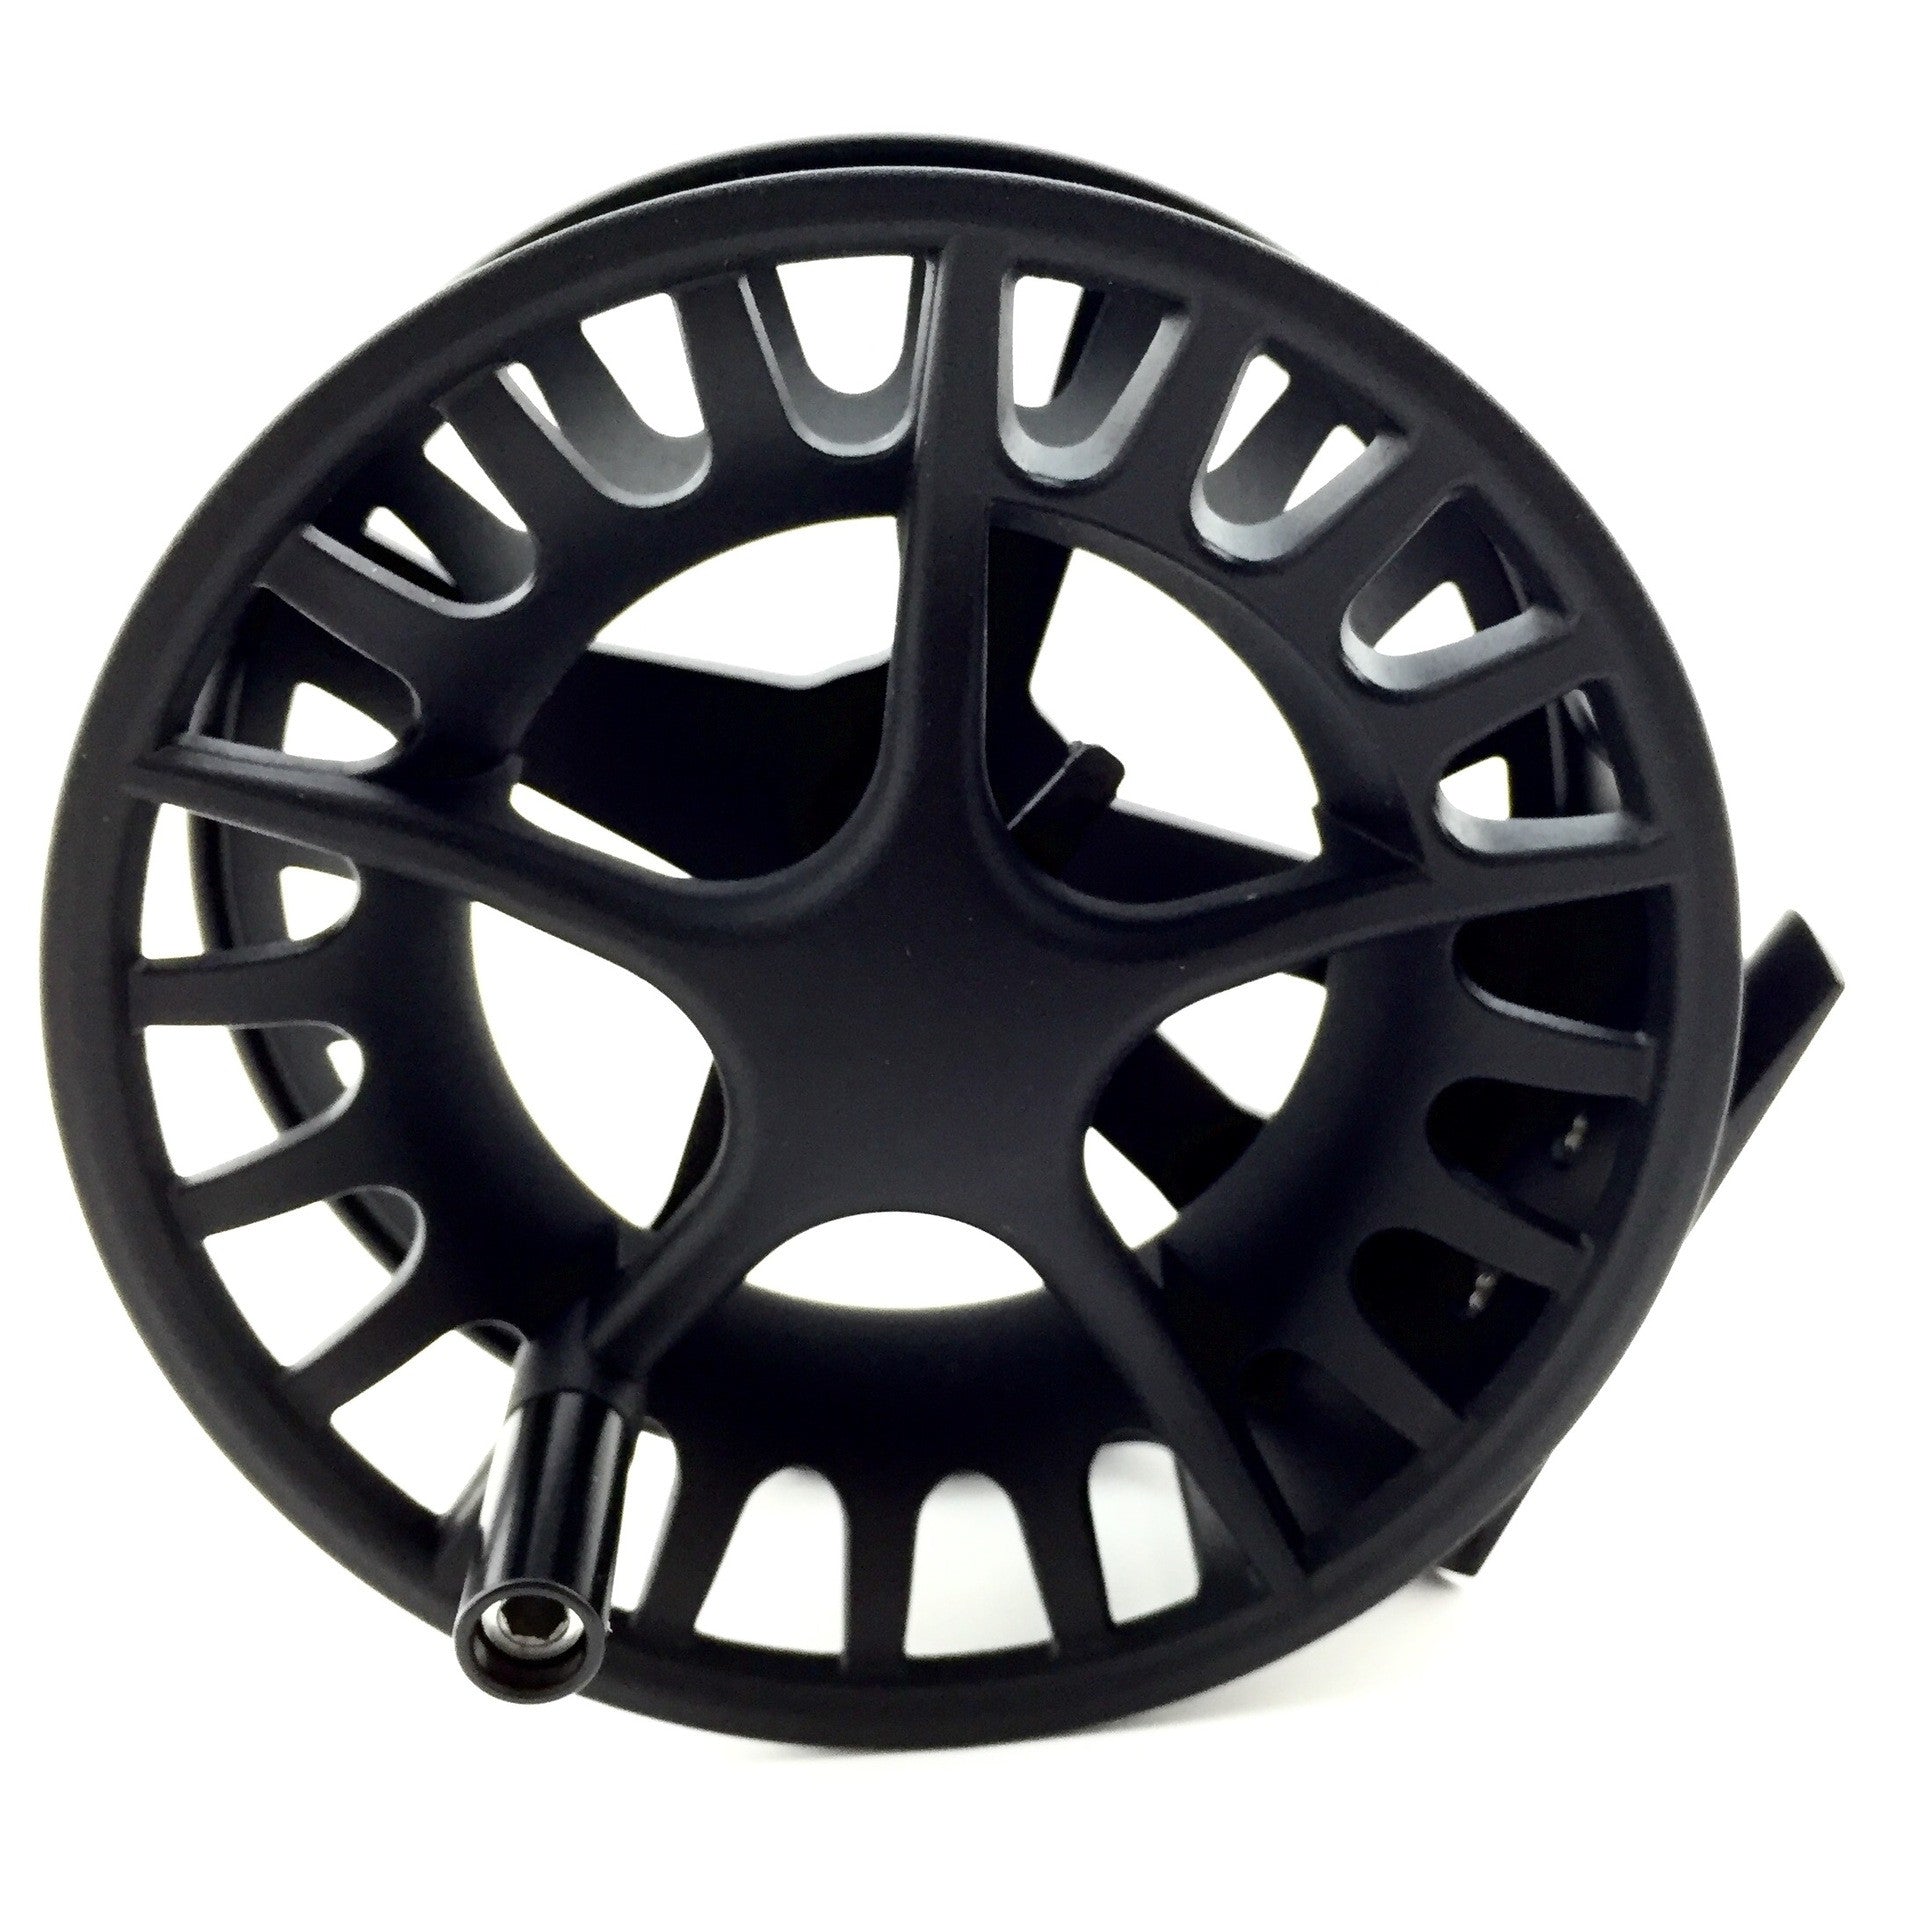 Waterworks/Lamson Remix Fly Fishing Reels - Andy Thornal Company